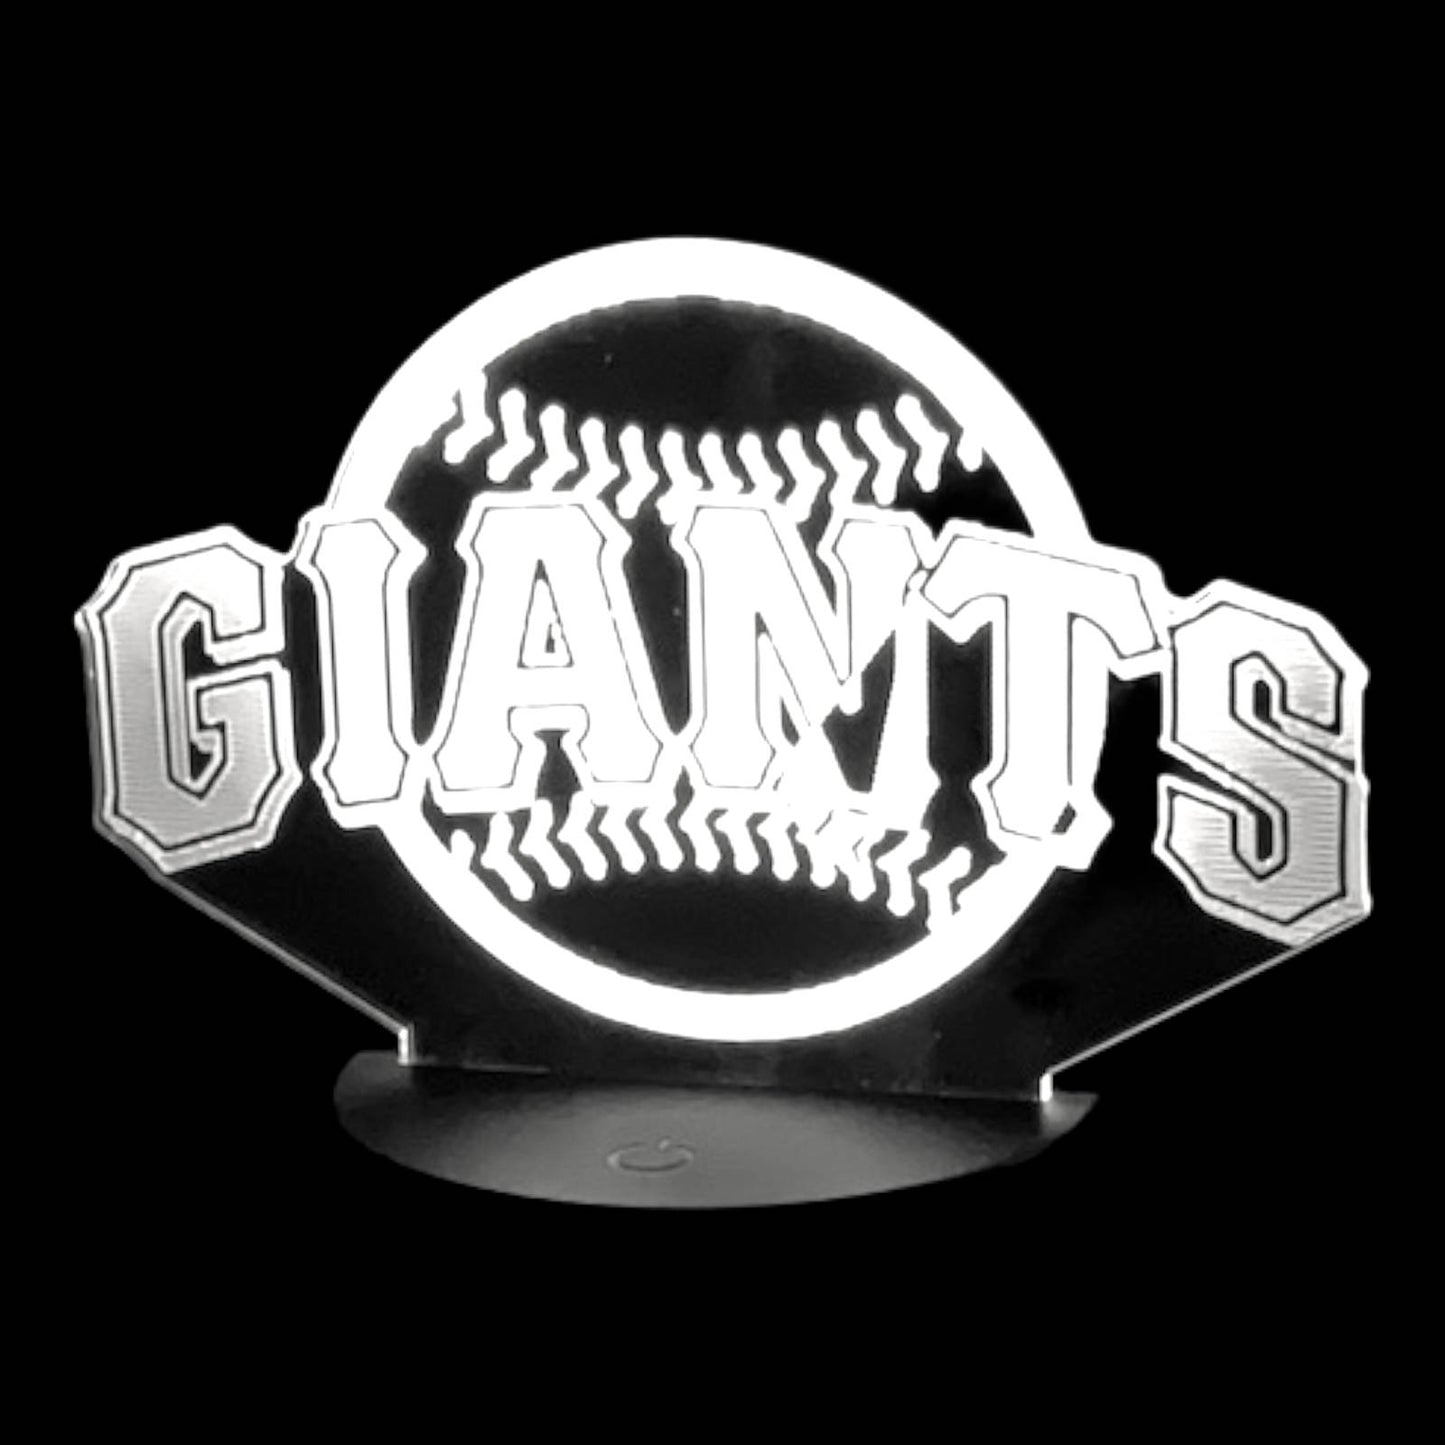 San Francisco Giants 3D LED Night-Light 7 Color Changing Lamp w/ Touch Switch